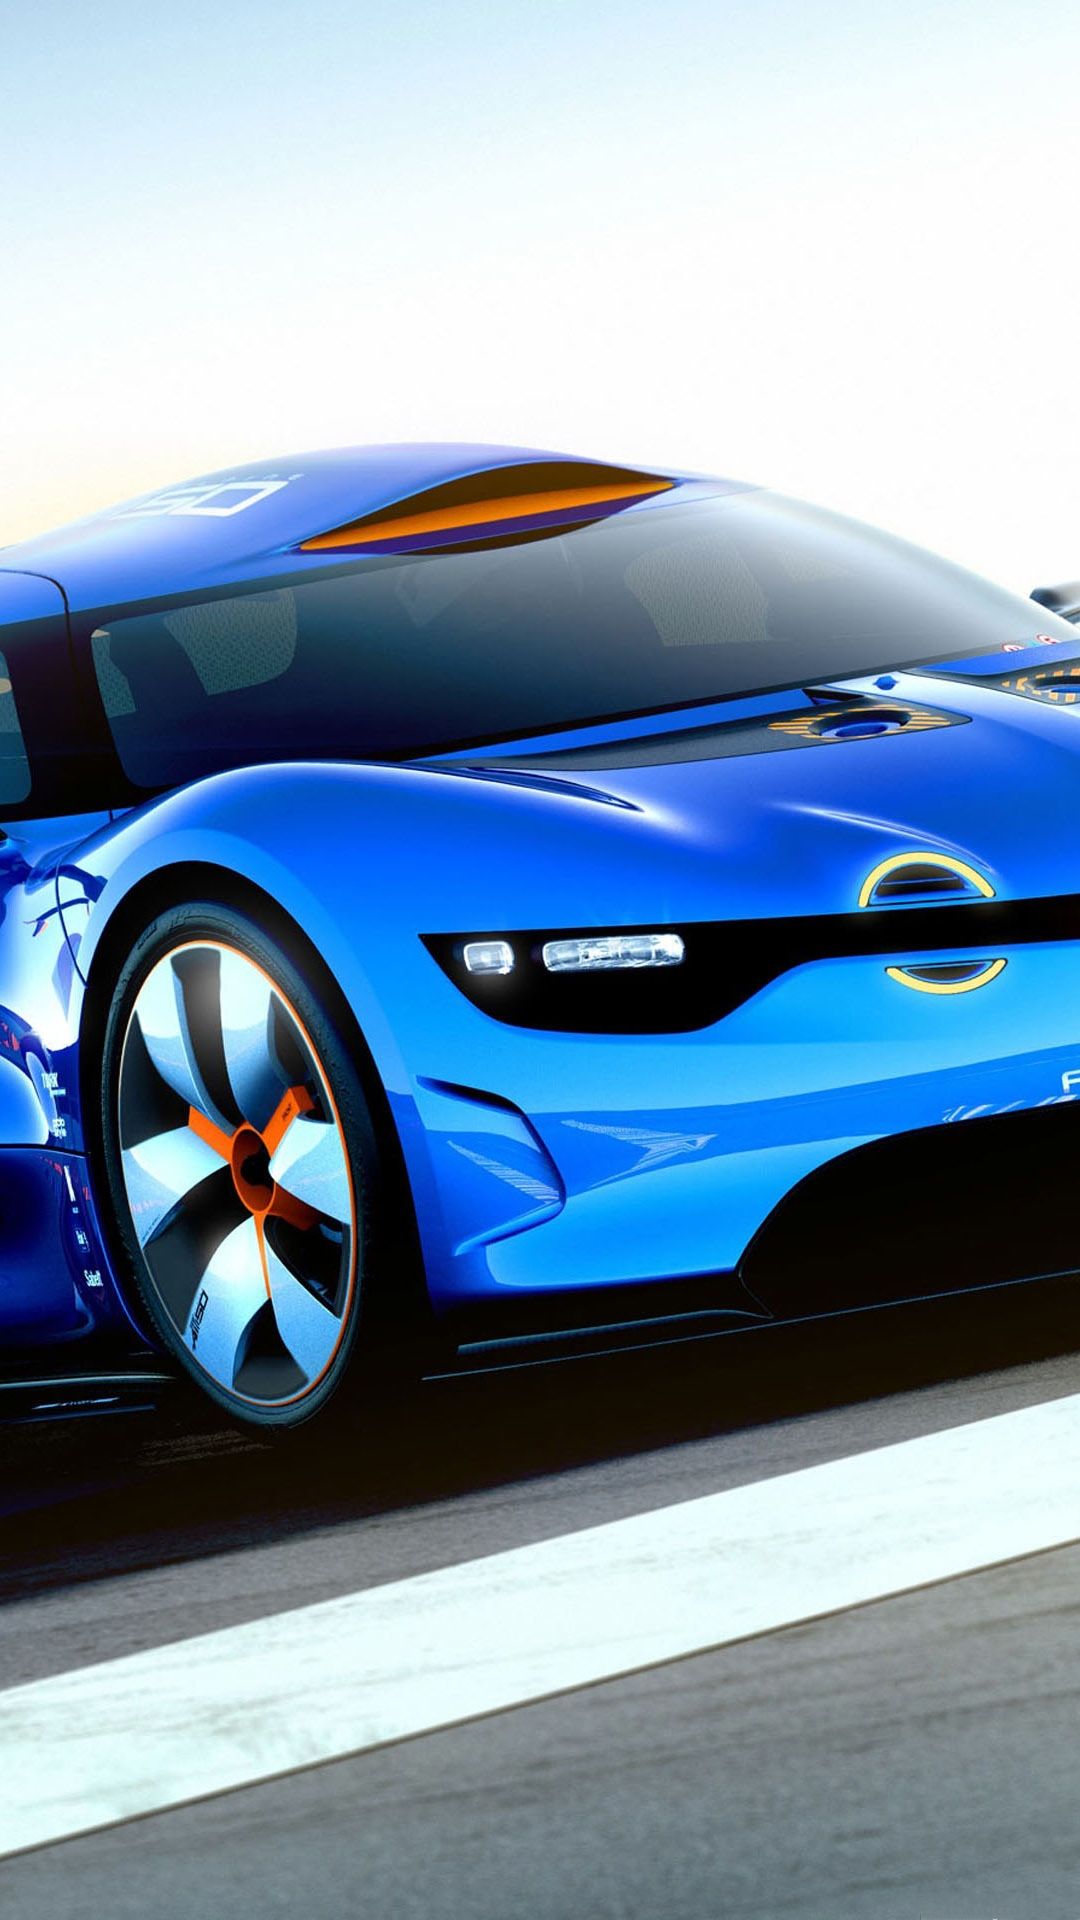 Renault Alpine Concept Car Light Blue Android Wallpaper free download